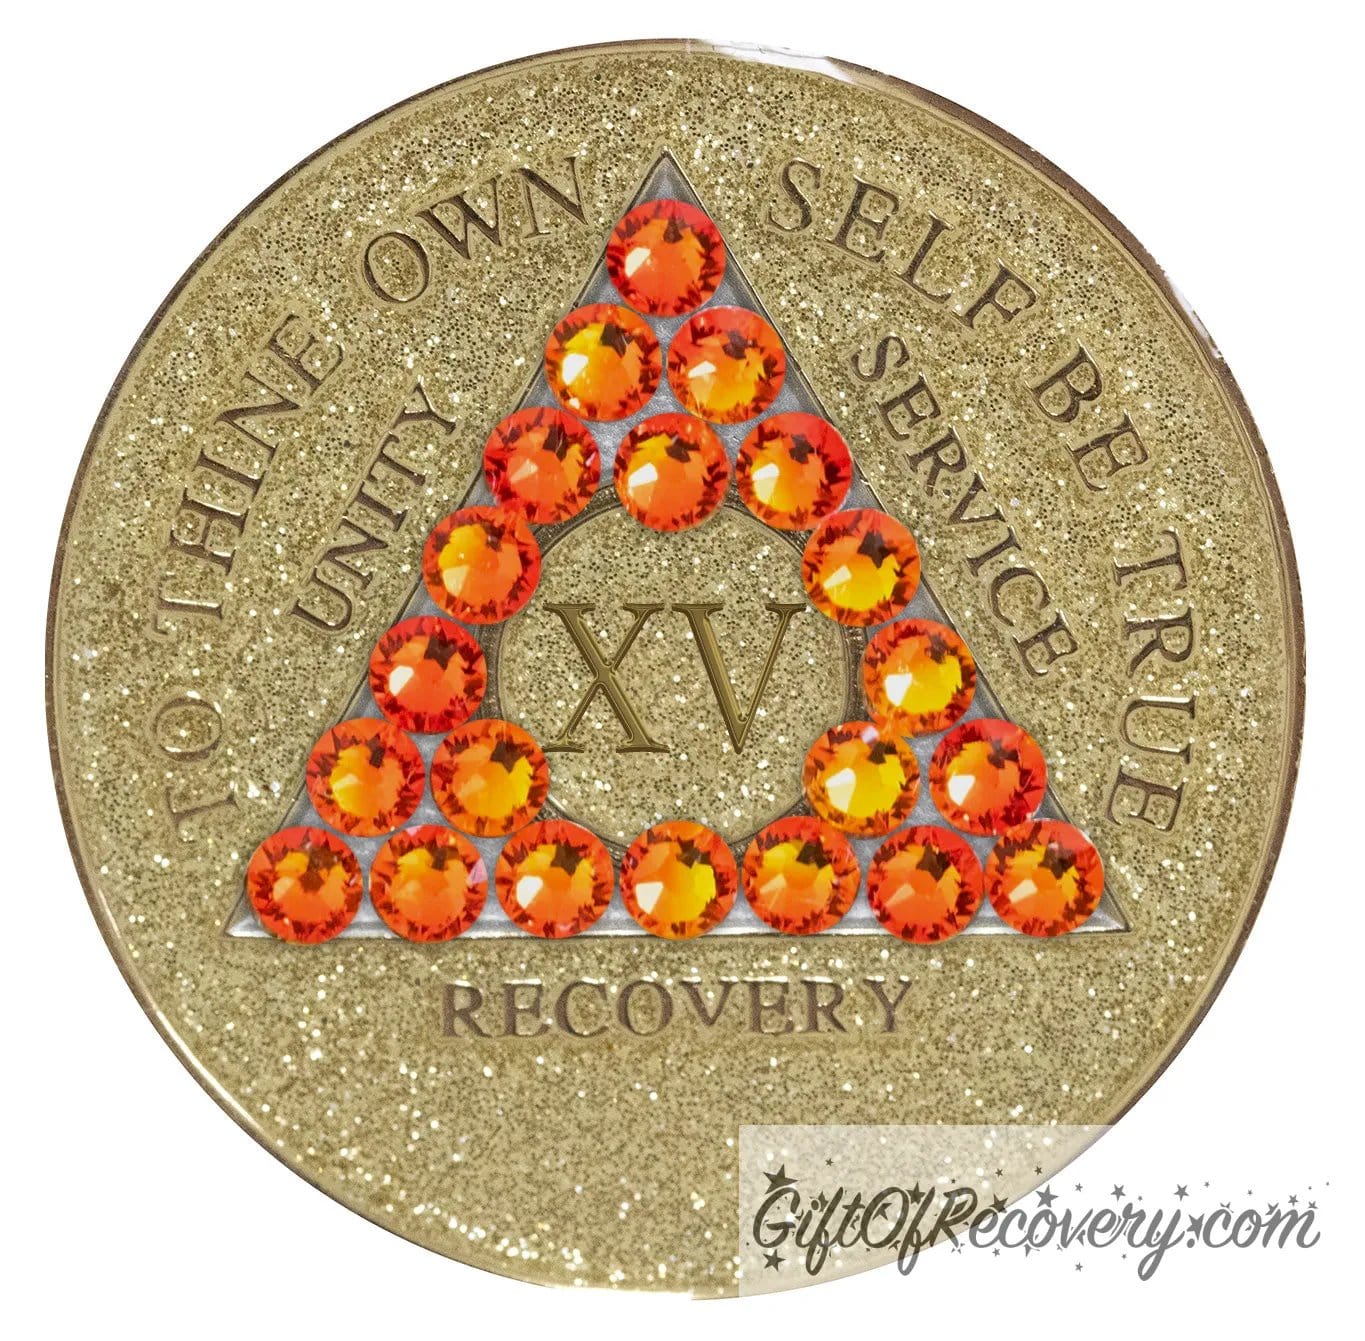 15 year Gold glitter AA medallion with twenty-one fire opal genuine crystals in the shape of a triangle, to thine own self be true, unity, service, recovery embossed in 14k gold-plated brass along with the rim of the medallion, sealed in a high-quality, chip and scratch-resistant resin dome giving it a beautiful glossy look that will last.